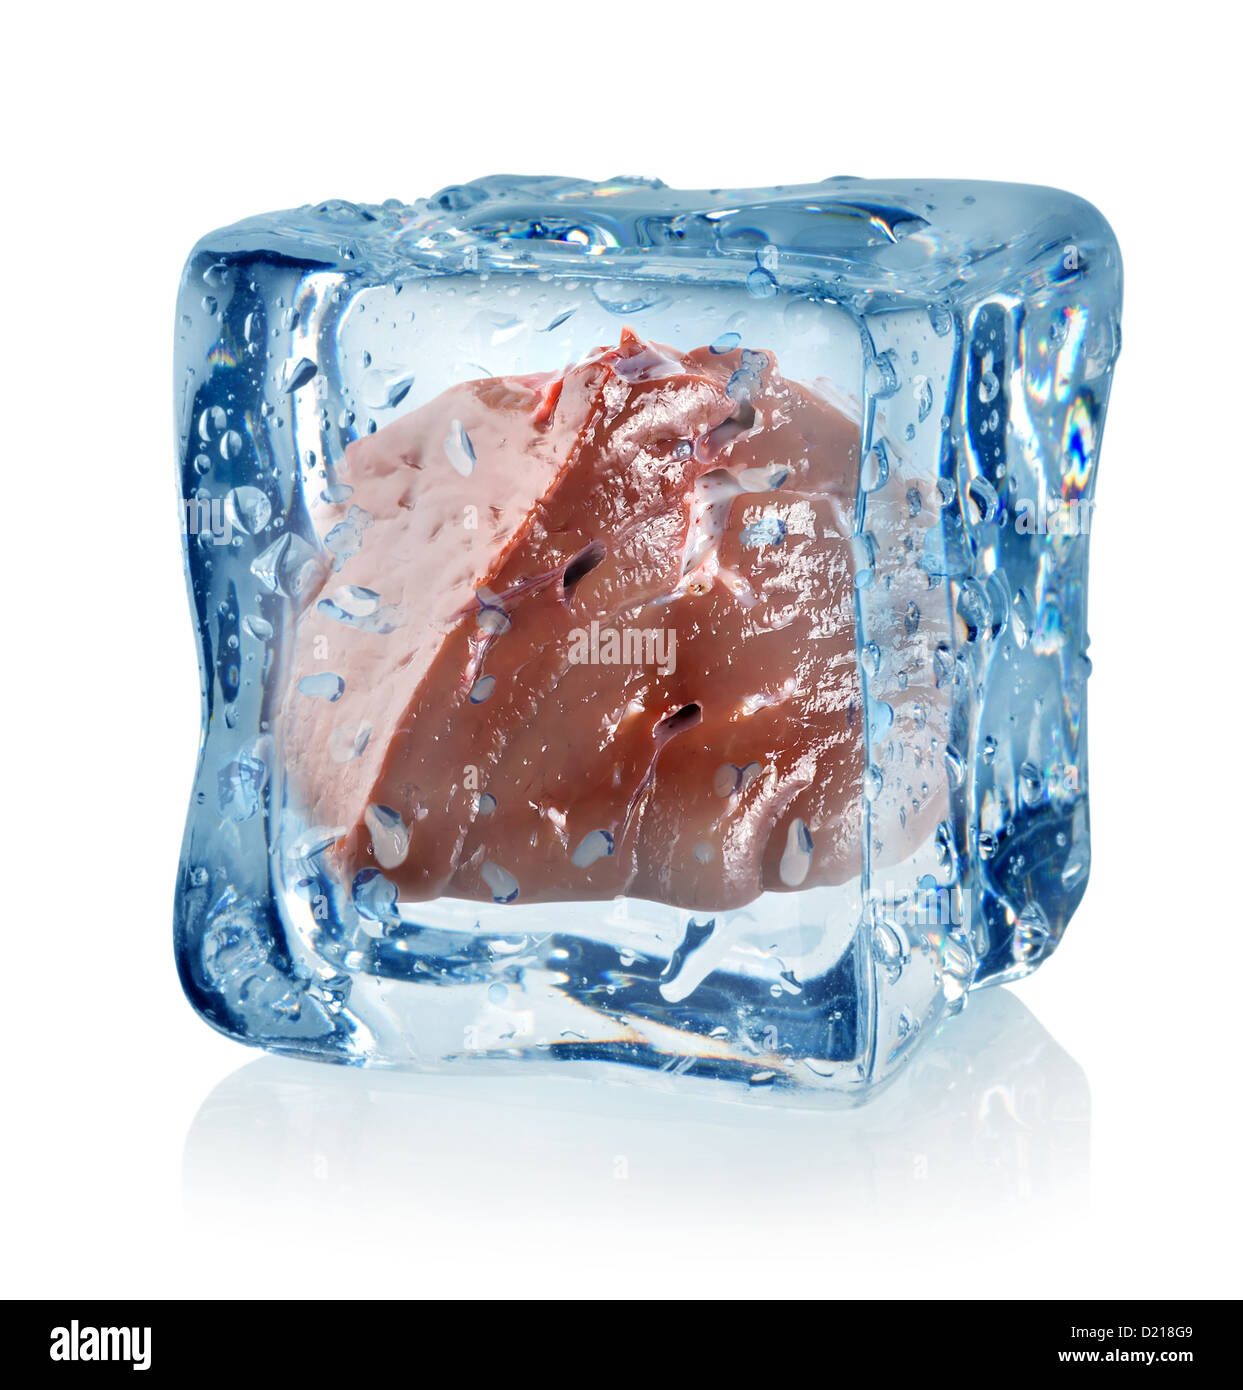 Ice cube and liver isolated on a white background Stock Photo